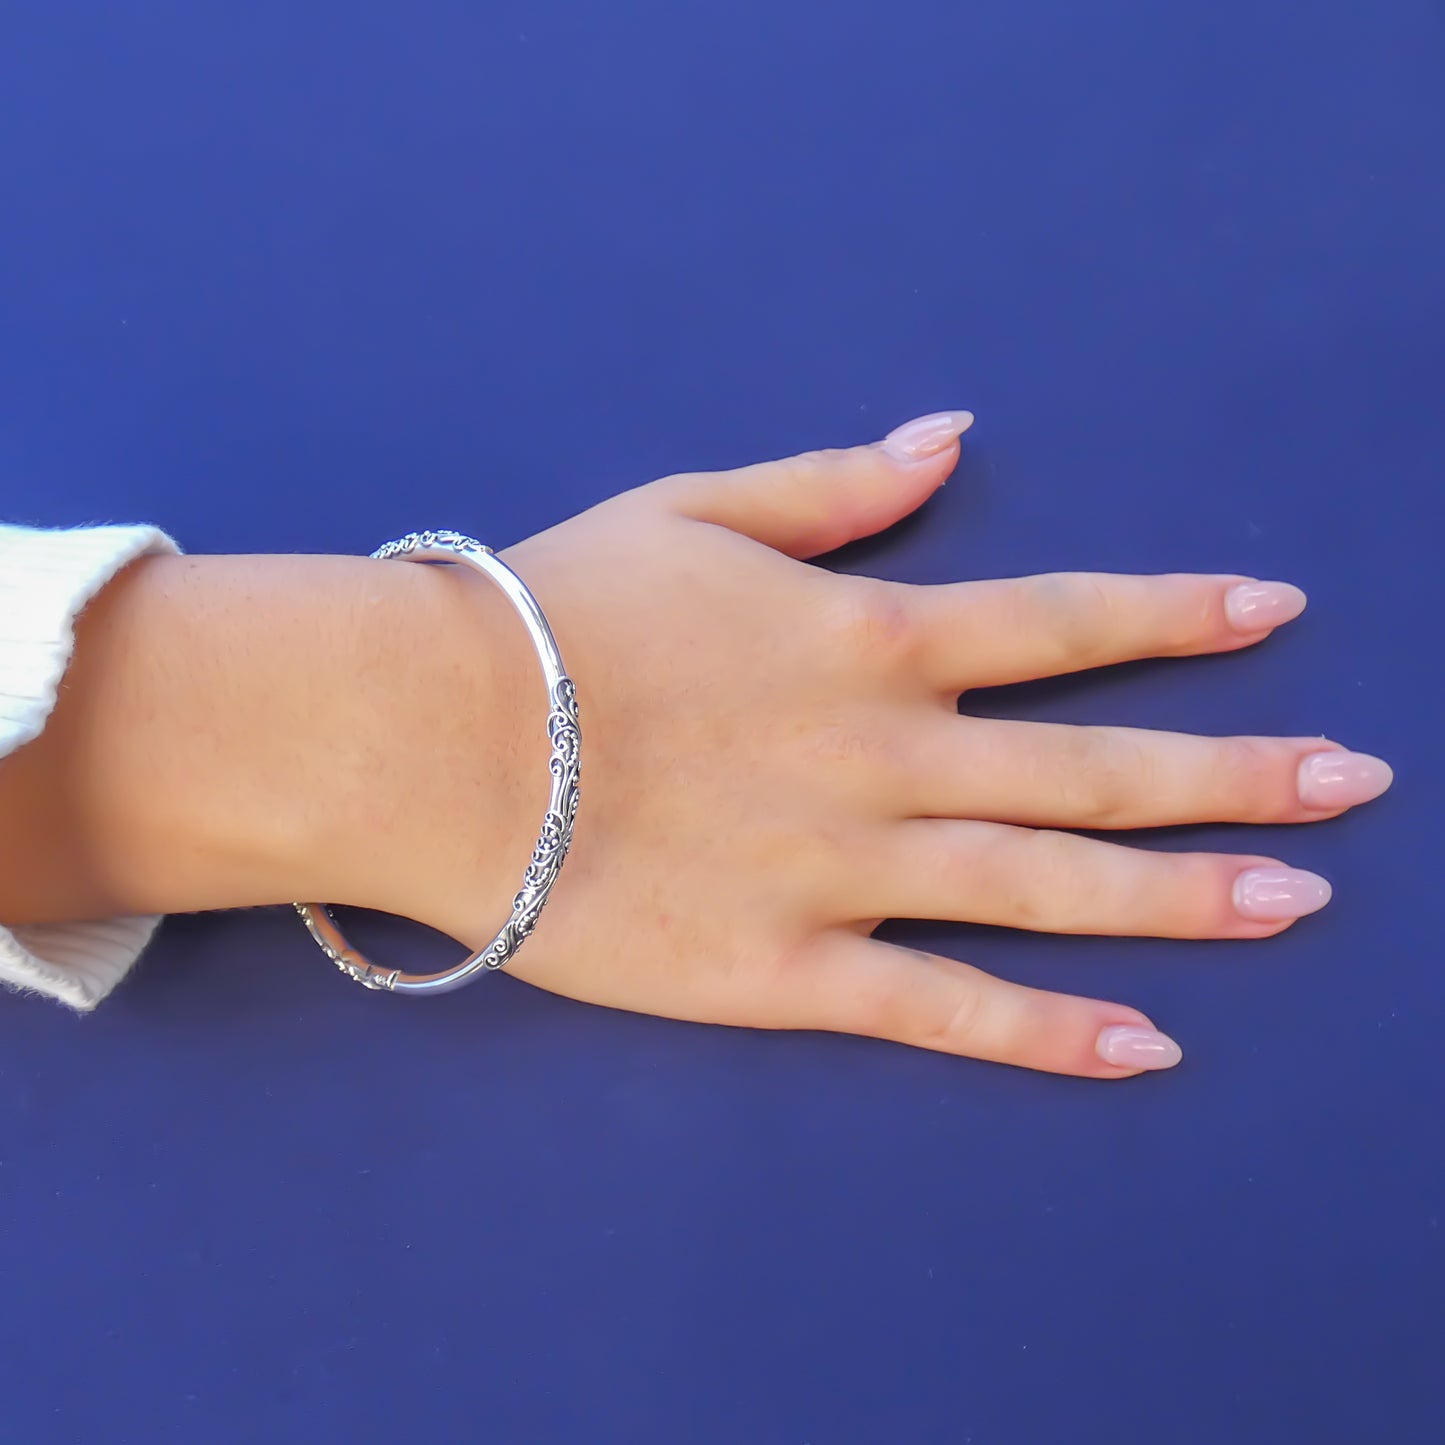 Woman wearing a silver bangle bracelet with three areas of filigree wire design adornment.